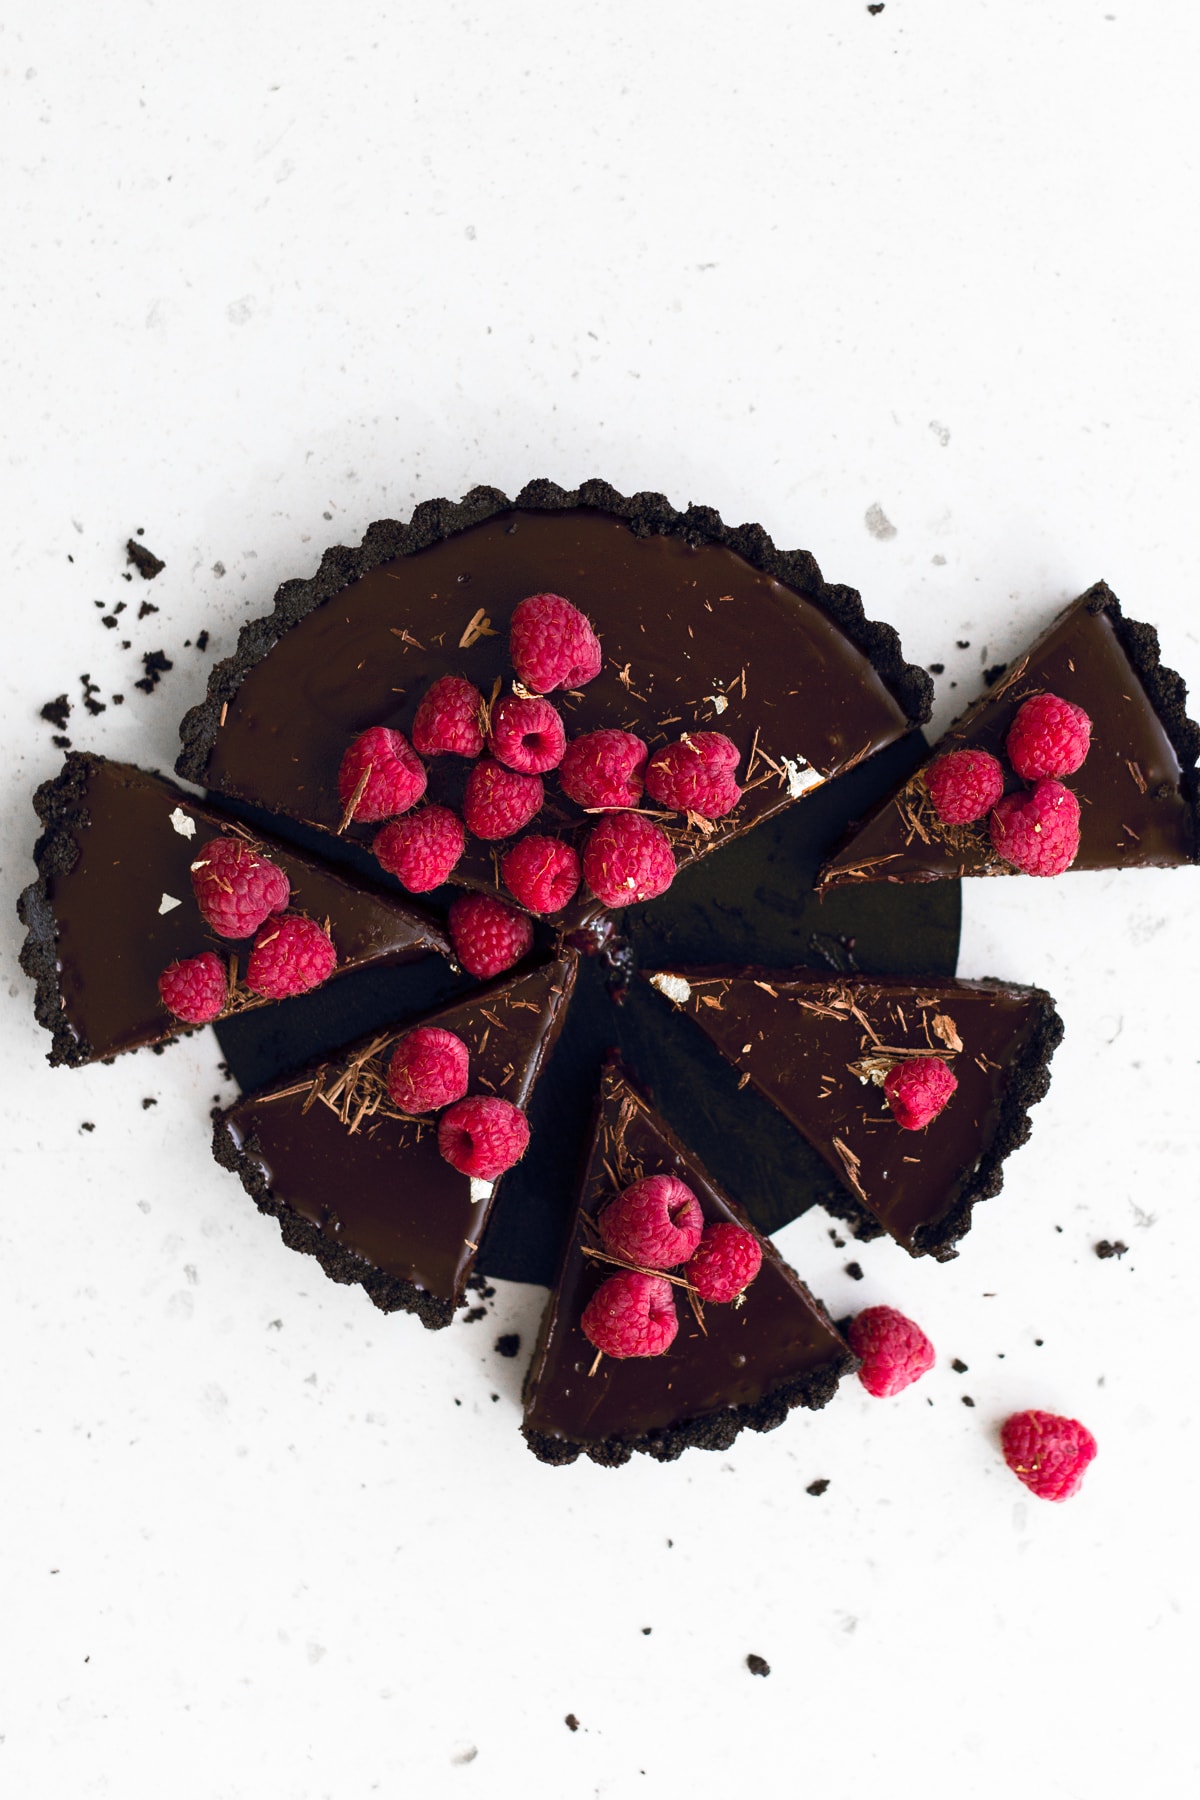 Wow your friends with this simple, delicious and quick Vegan Chocolate Ganache Tart recipe. Made in under 30 minutes and with only 6 ingredients! #chocolate #ganache #tart #simple #oreo #nobake #raspberry #nocook #chocolatetart #vegan #plantbased